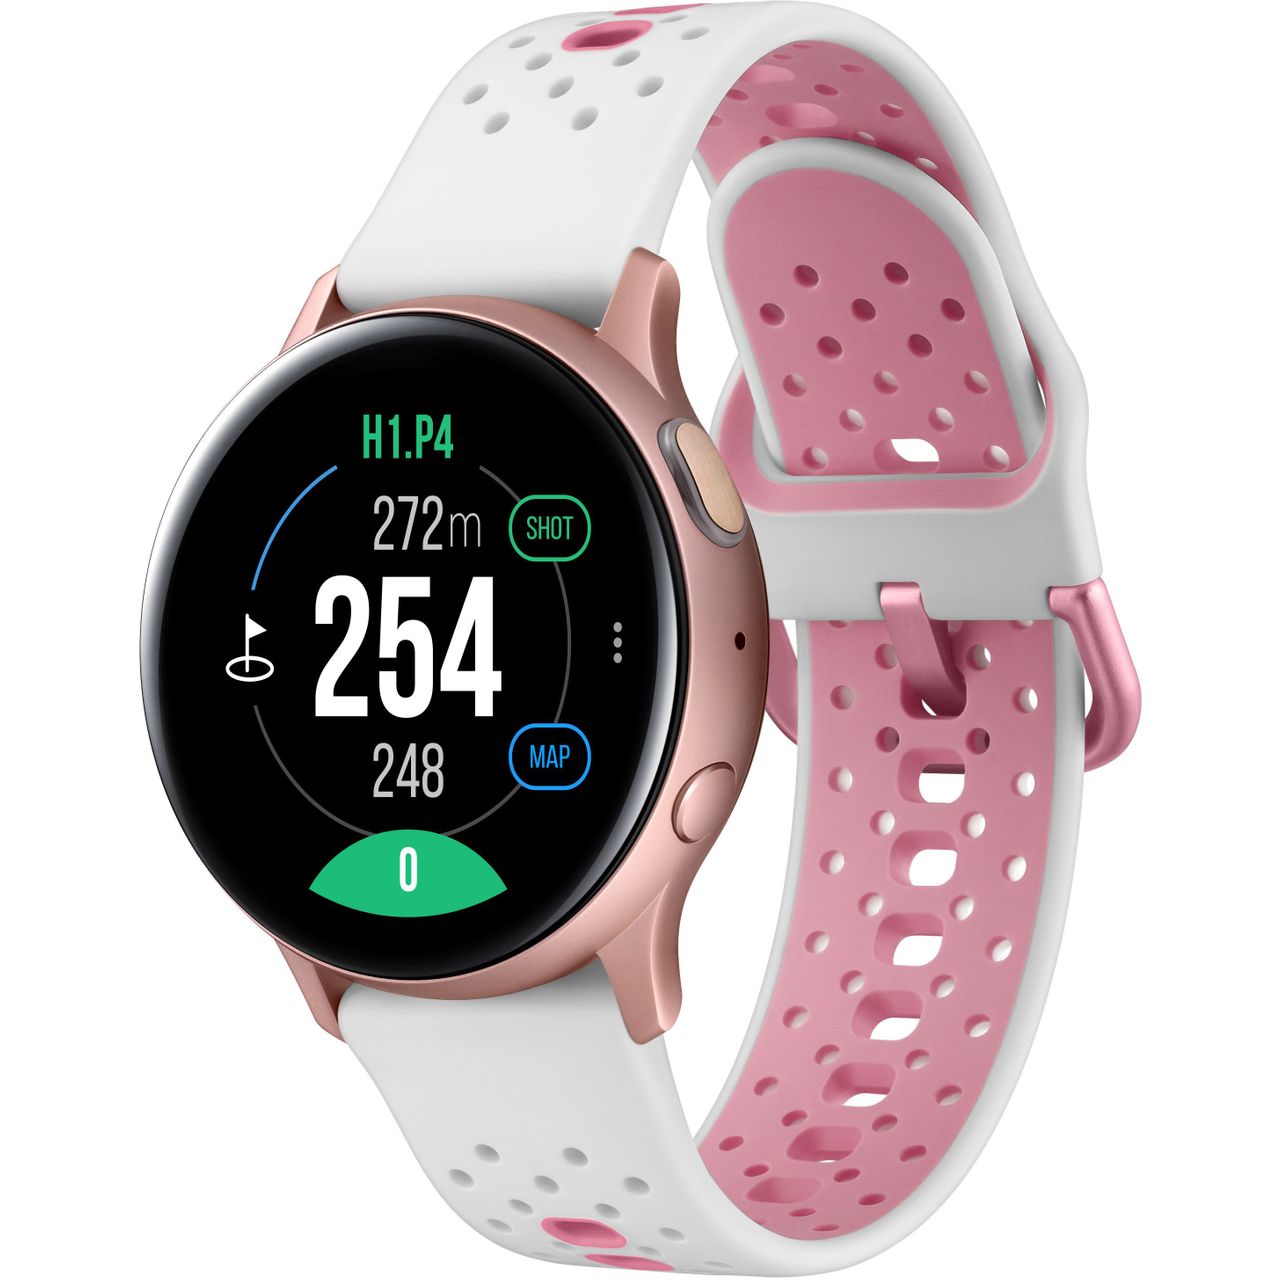 Samsung Galaxy Watch Active2 Golf Edition, Review